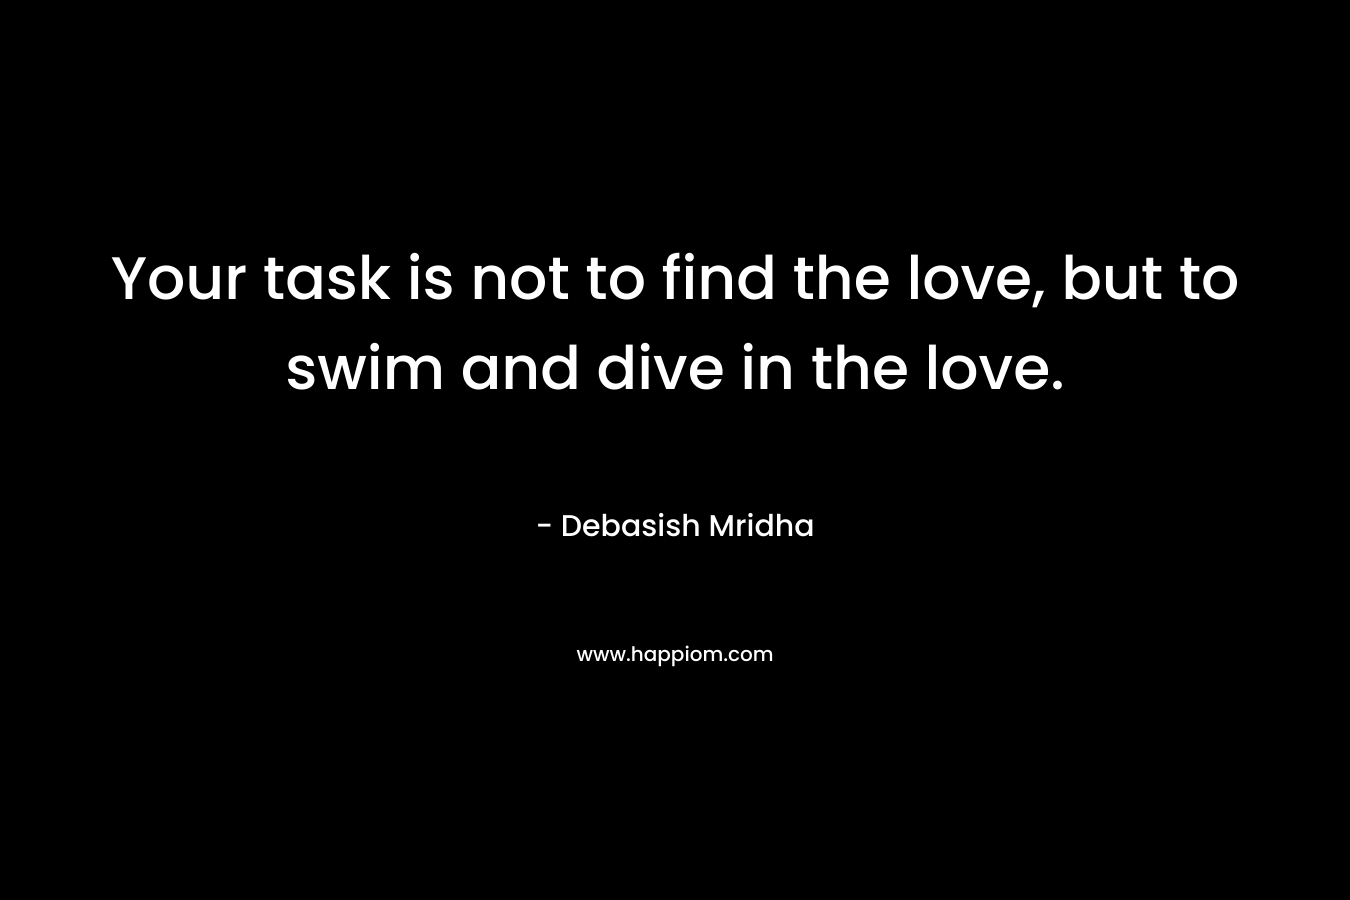 Your task is not to find the love, but to swim and dive in the love.